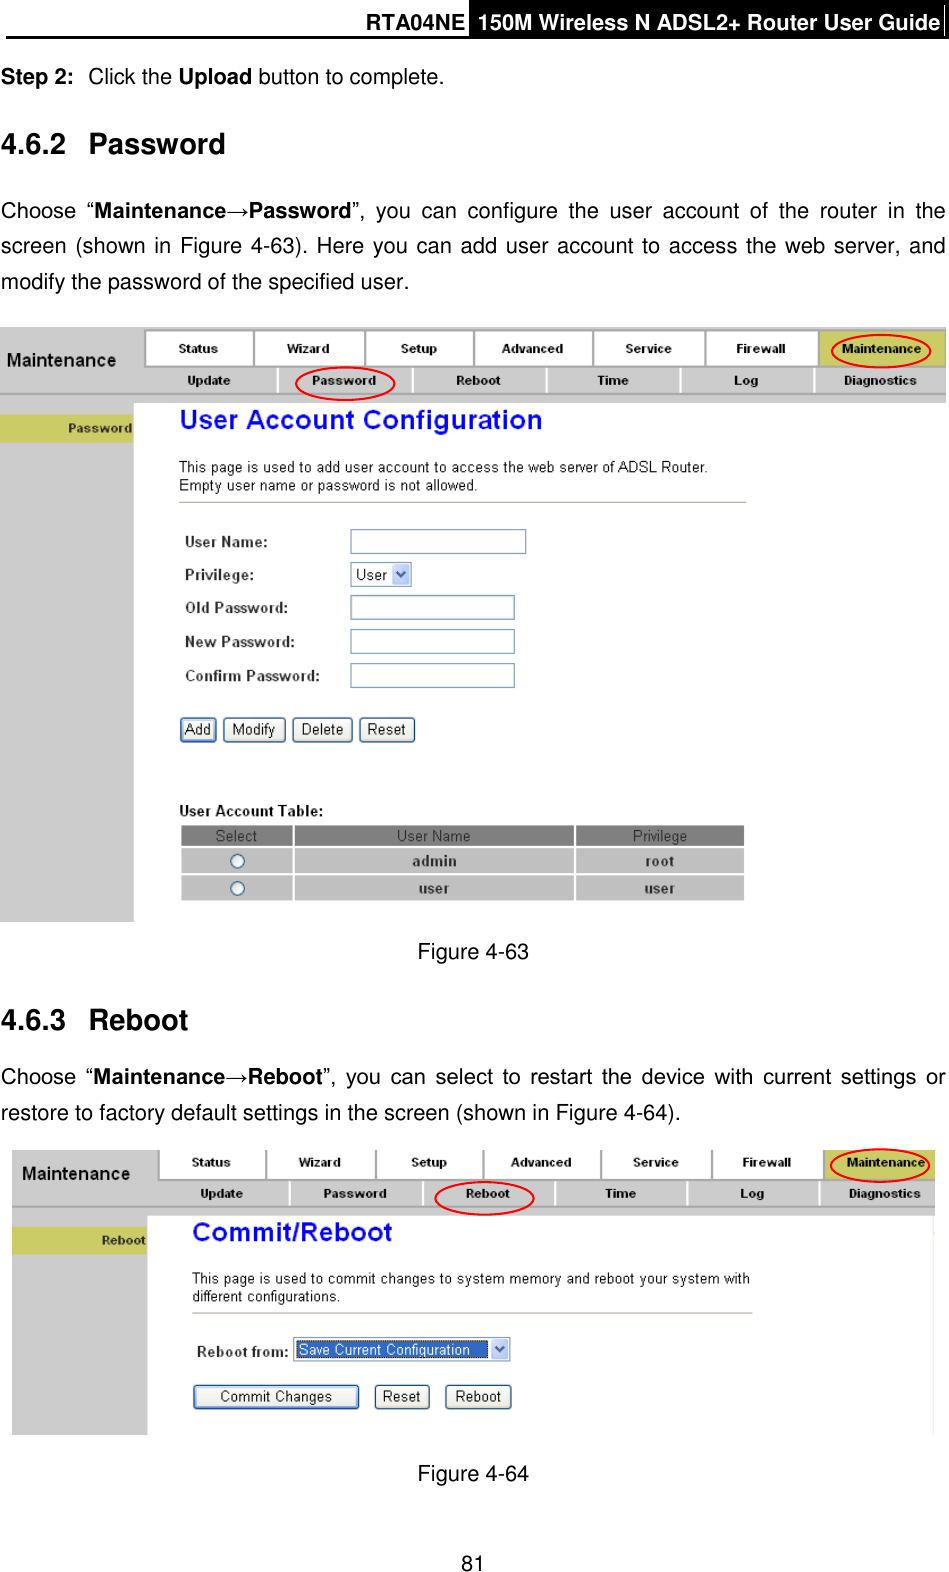 RTA04NE 150M Wireless N ADSL2+ Router User Guide  81 Step 2:  Click the Upload button to complete. 4.6.2  Password Choose  “Maintenance→Password”,  you  can  configure  the  user  account  of  the  router  in  the screen (shown in Figure 4-63). Here you can add user account to access the web server, and modify the password of the specified user.    Figure 4-63 4.6.3  Reboot Choose  “Maintenance→Reboot”,  you  can  select  to  restart  the  device  with  current  settings  or restore to factory default settings in the screen (shown in Figure 4-64).  Figure 4-64 